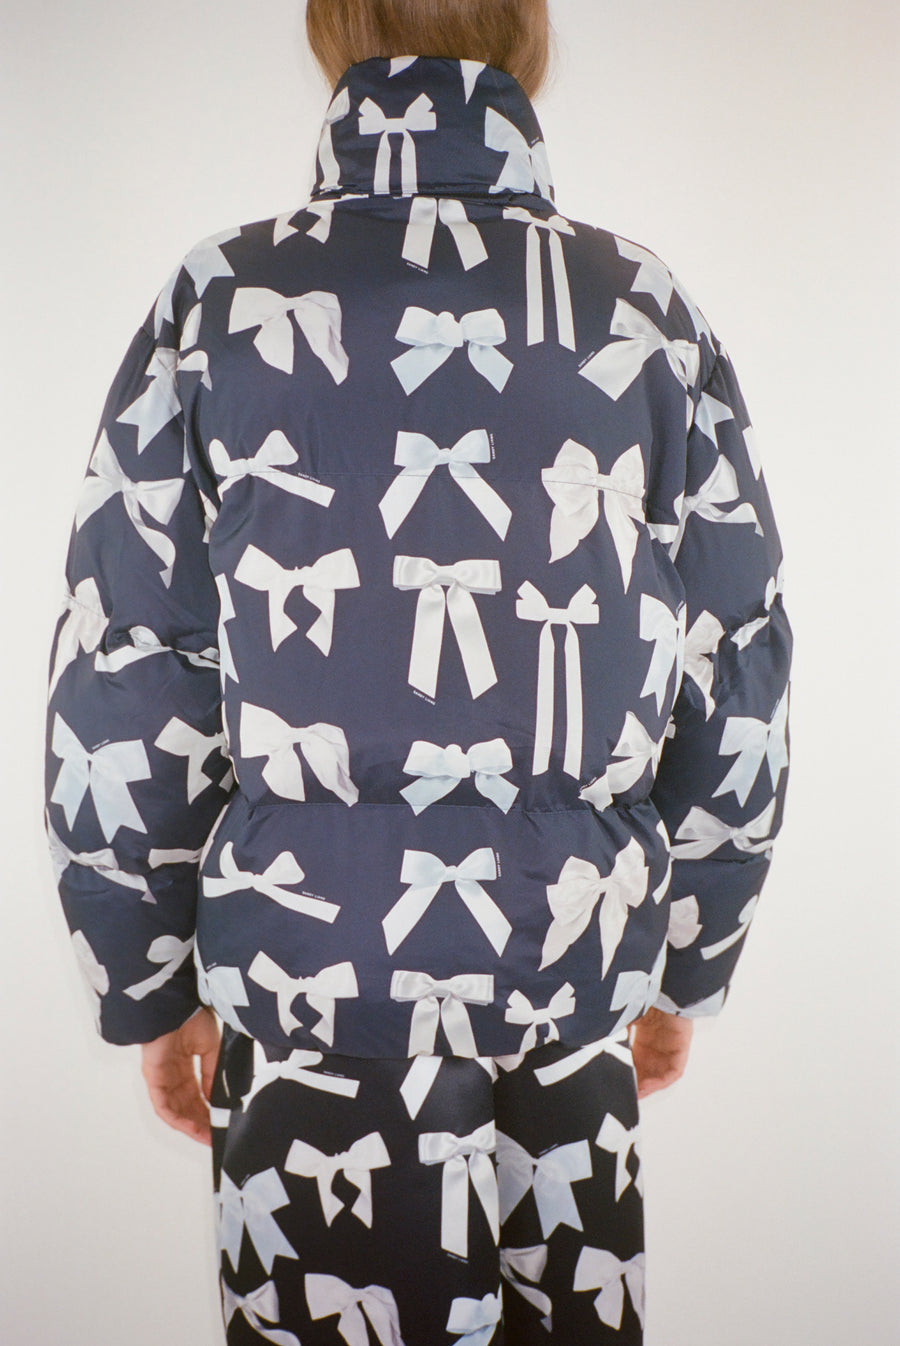 Puffer jacket in bow display print on model